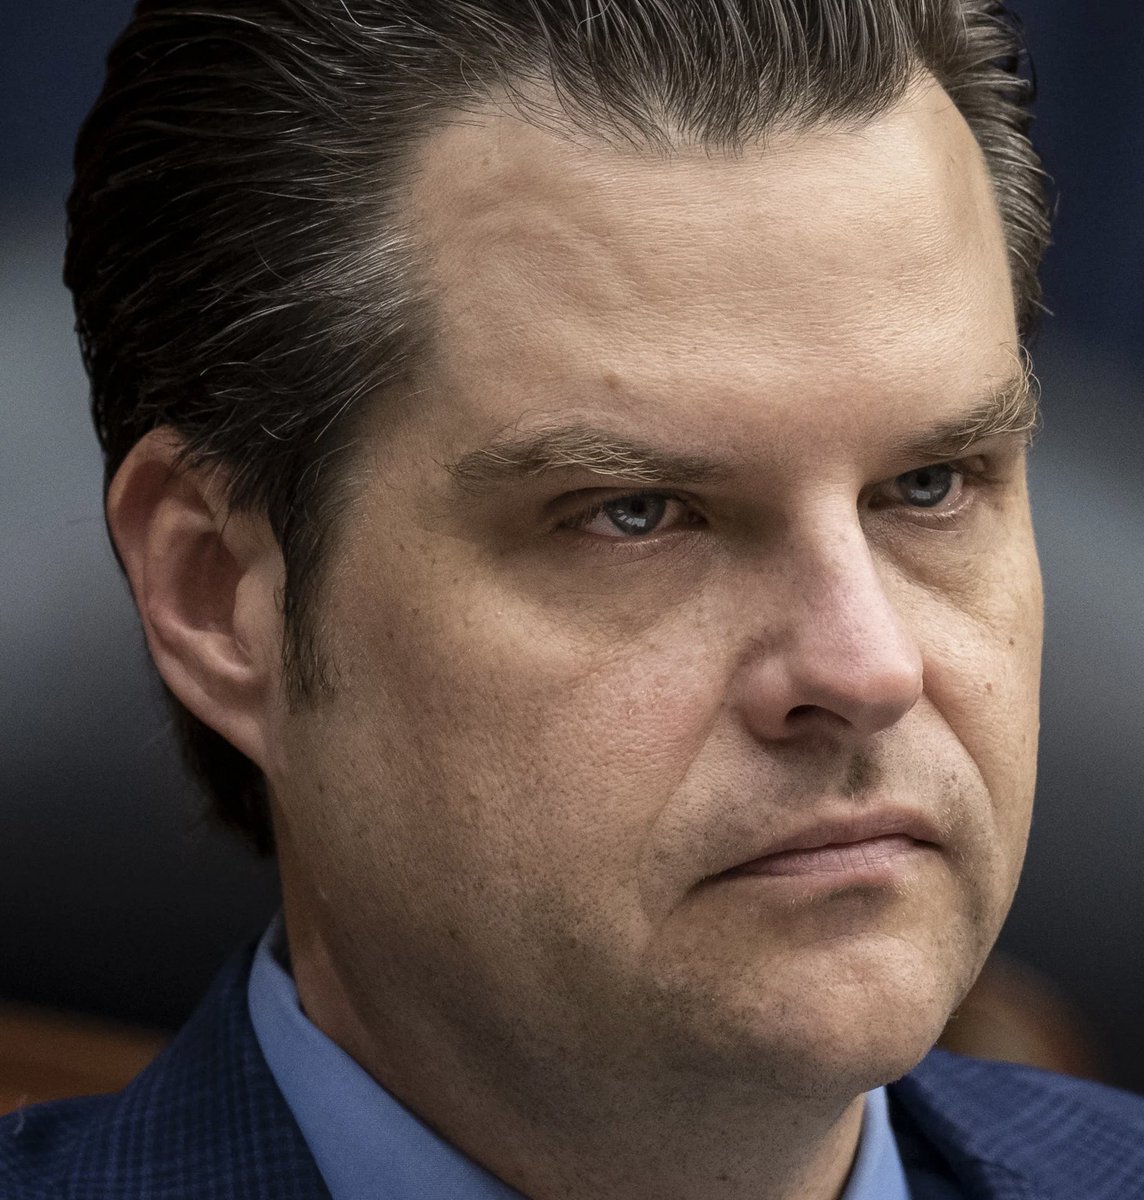 BREAKING: CNN drops bombshell on Trumper Congressman Matt Gaetz, reveals that Republican House Speaker Kevin McCarthy and his allies are preparing to launch a counterattack against Gaetz by “expelling” him from Congress for trying to launch a mutiny against McCarthy. CNN reports…